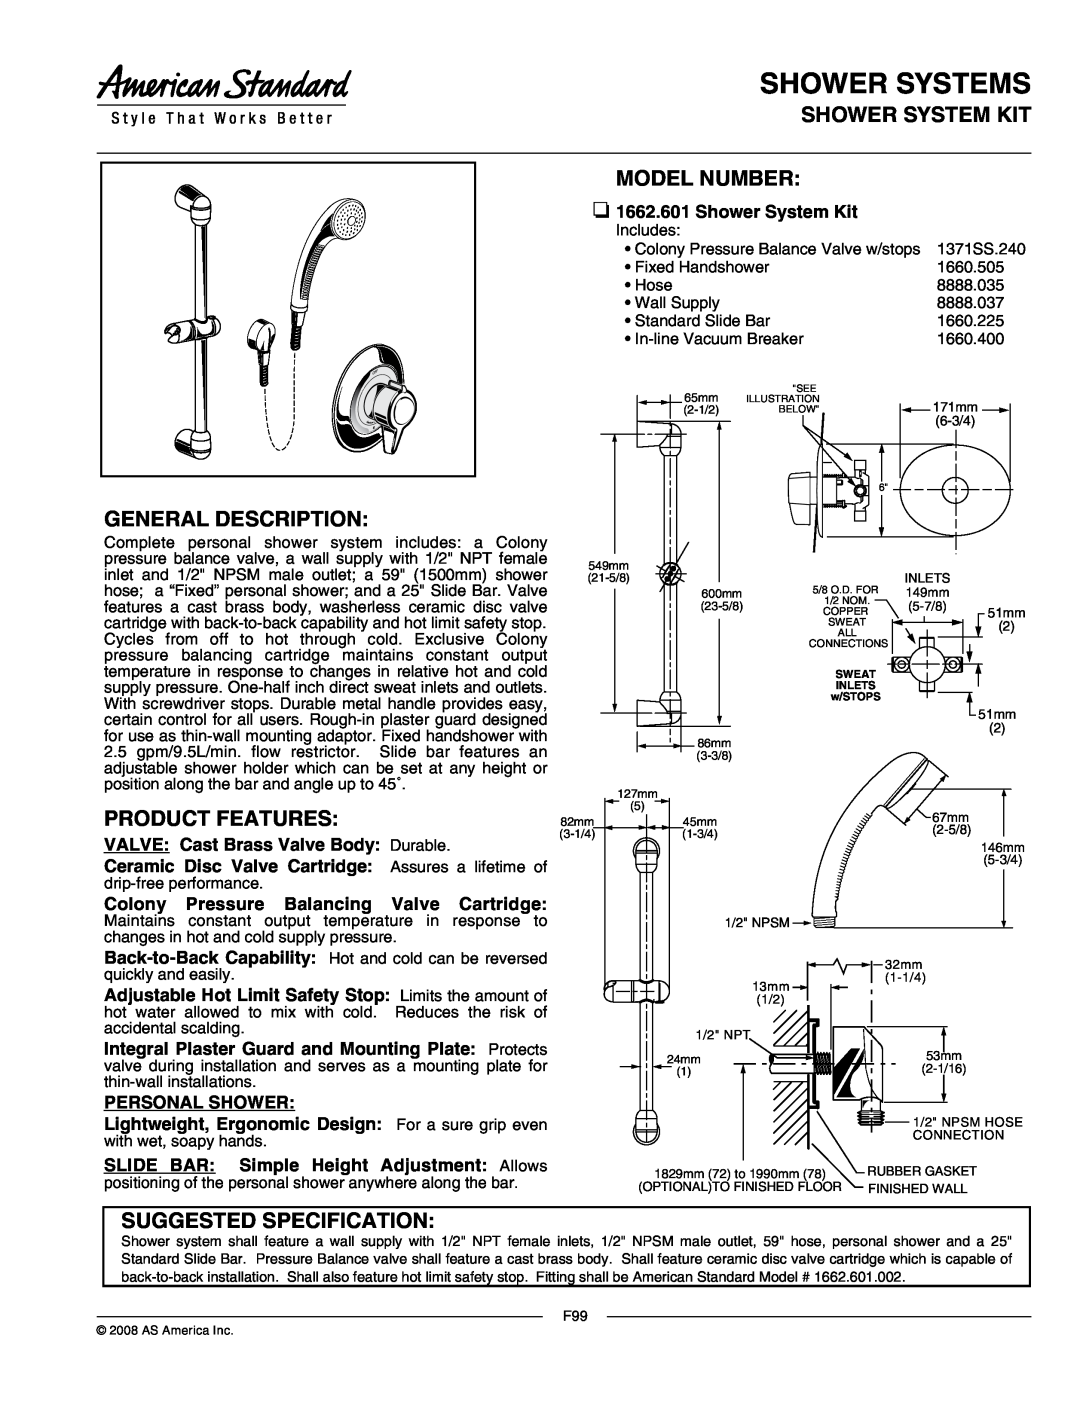 American Standard 1662.601 specifications Shower Systems, Shower System Kit, General Description, Product Features 